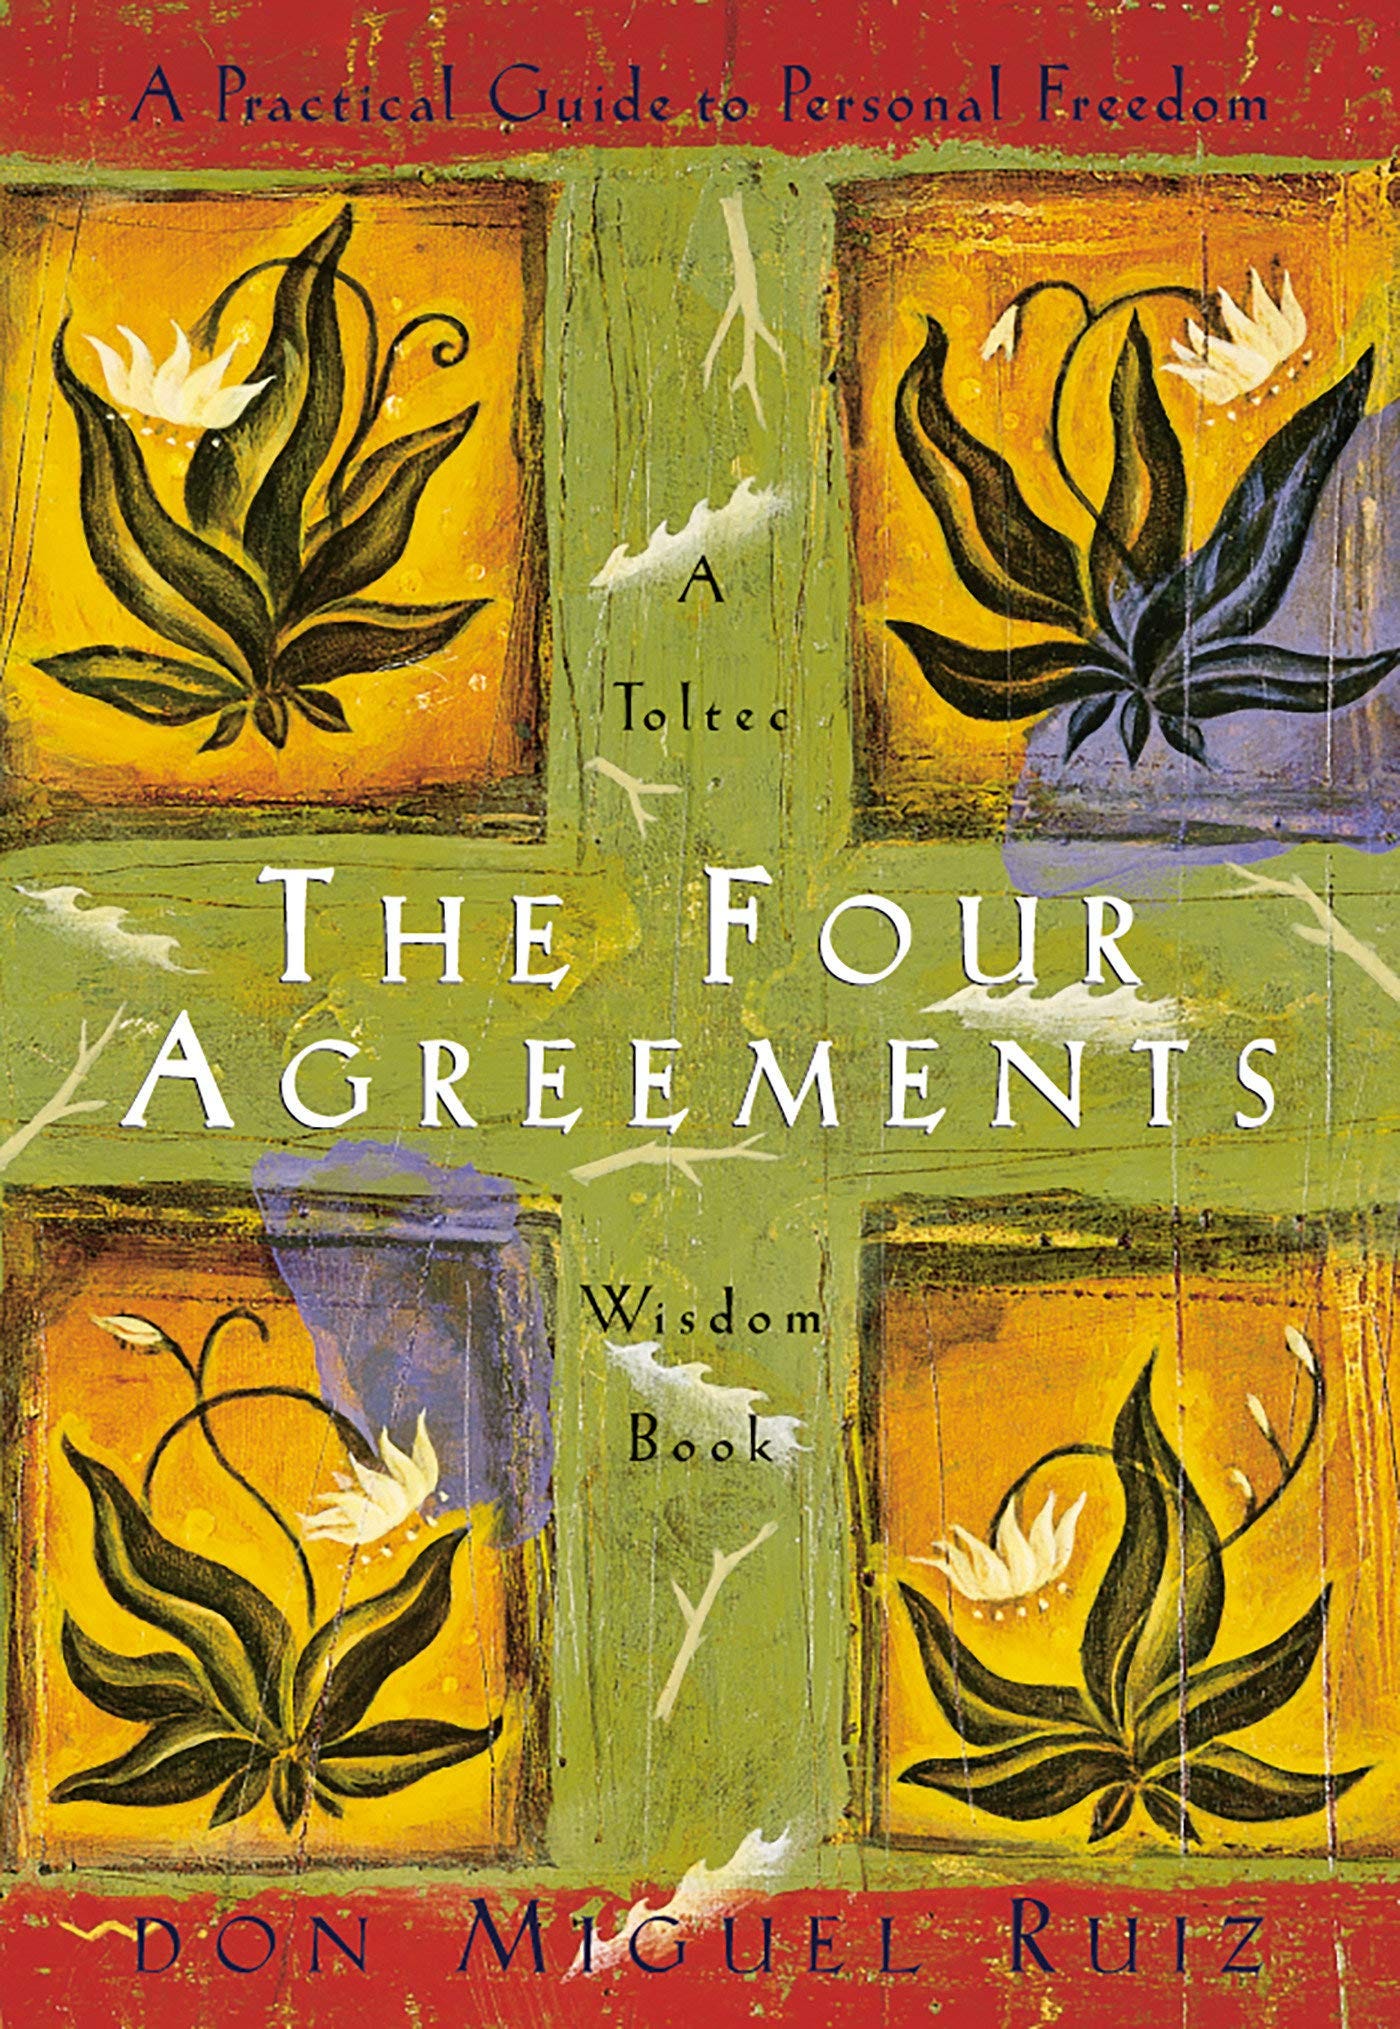 The Four Agreements: A Practical Guide to Personal Freedom (A Toltec Wisdom  Book): Don Miguel Ruiz: 9781878424310: Amazon.com: Books